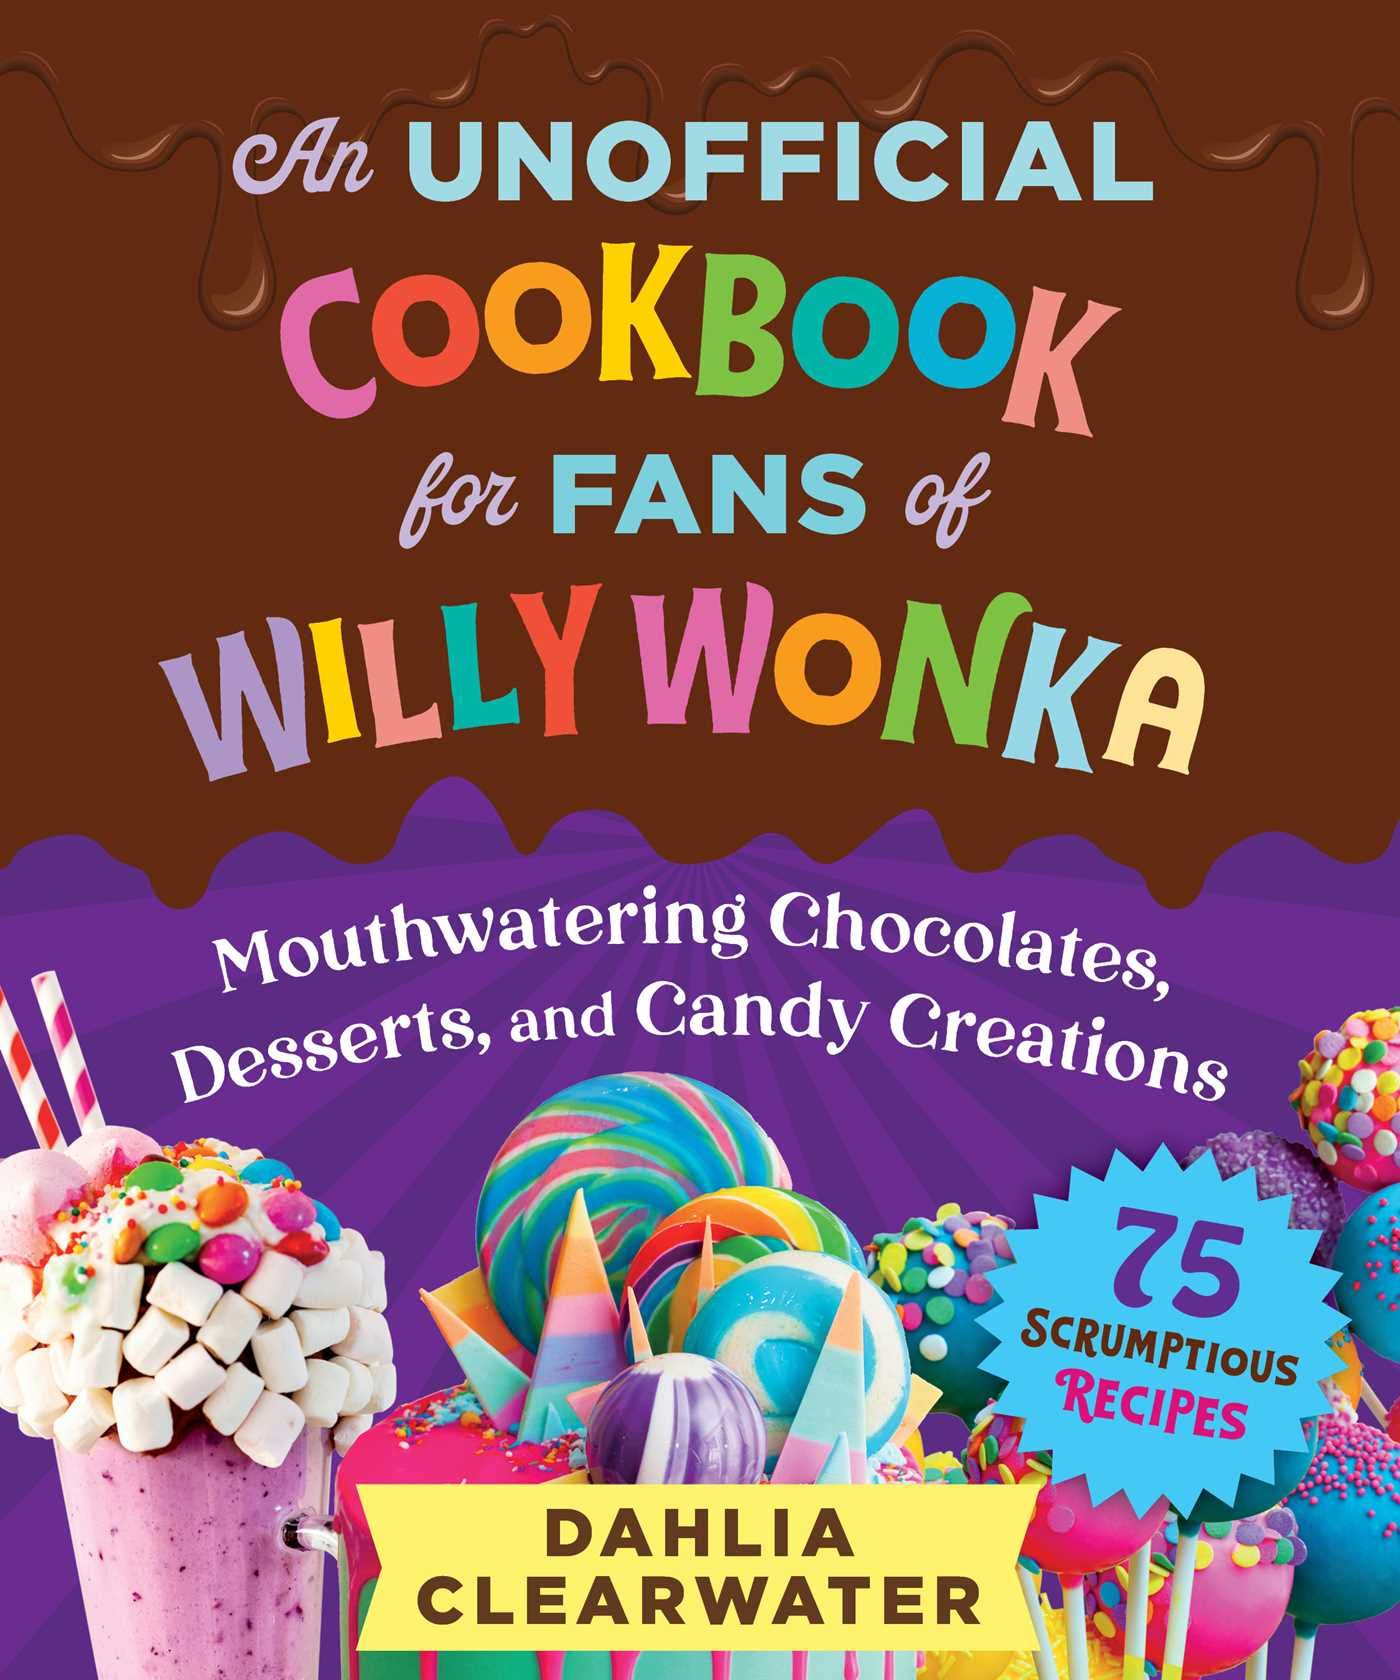 An Unofficial Cookbook for Fans of Willy Wonka: Mouthwatering Chocolates, Desserts, and Candy Creations―75 Scrumptious Recipes!